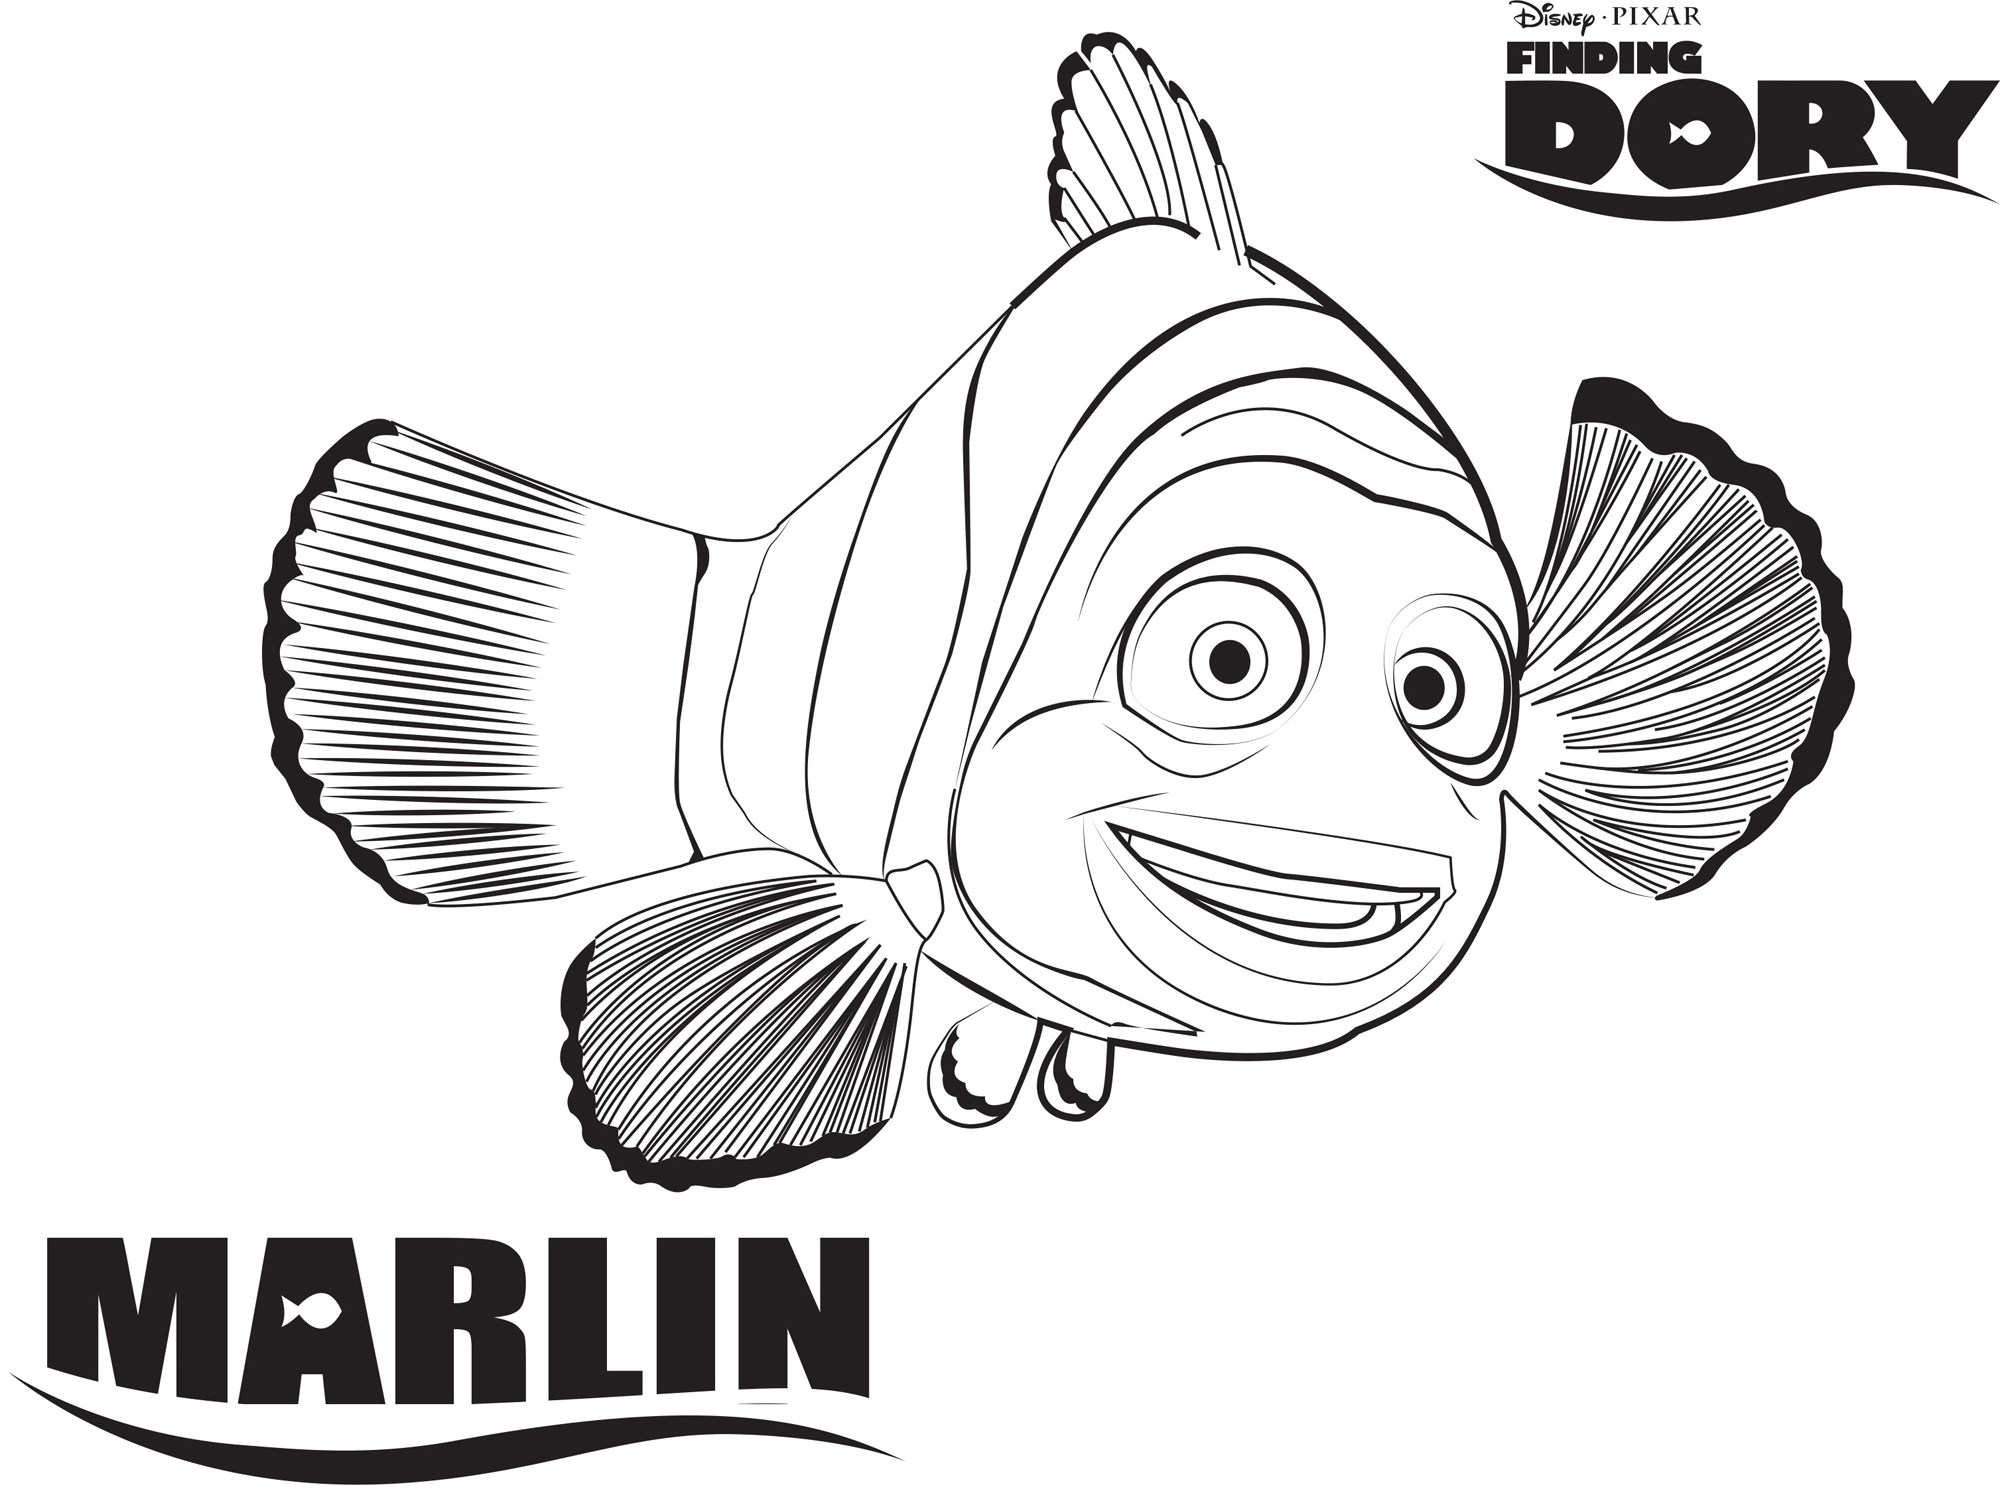 Marlin – Finding Dory Coloring Pages – Disney Movies List